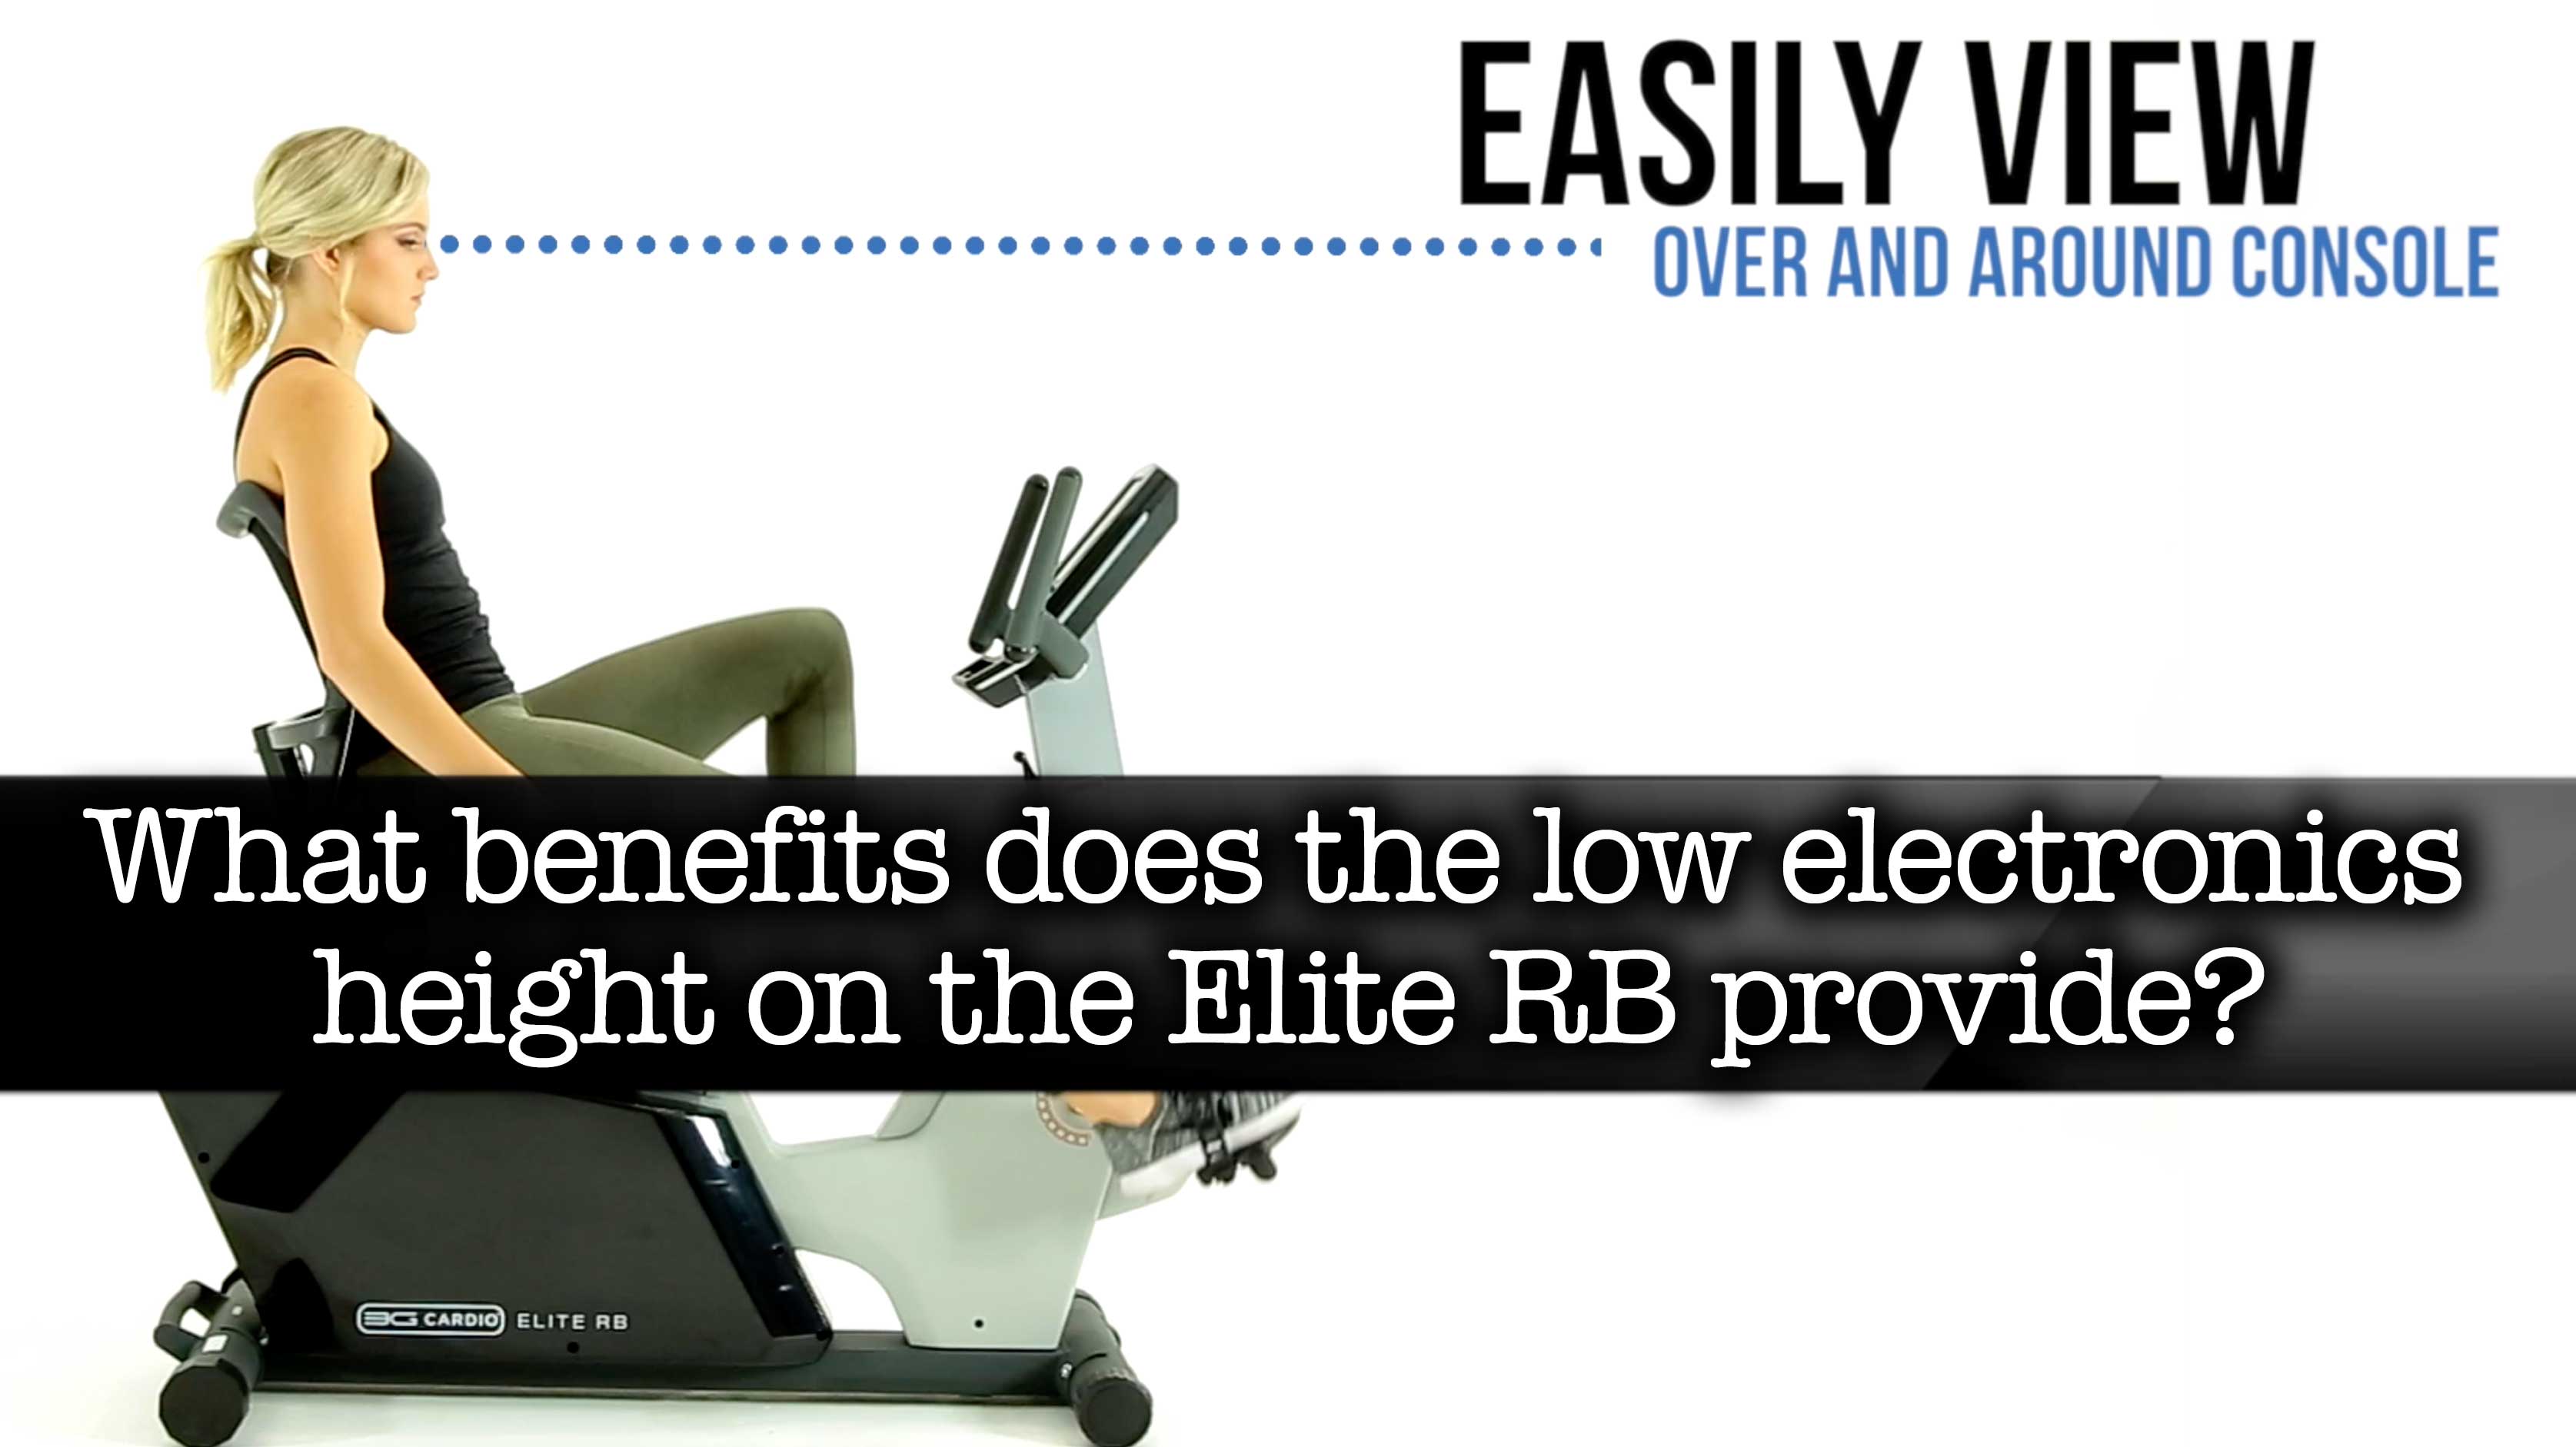 What benefits does the low electronics height on the Elite RB Recumbent Bike provide?